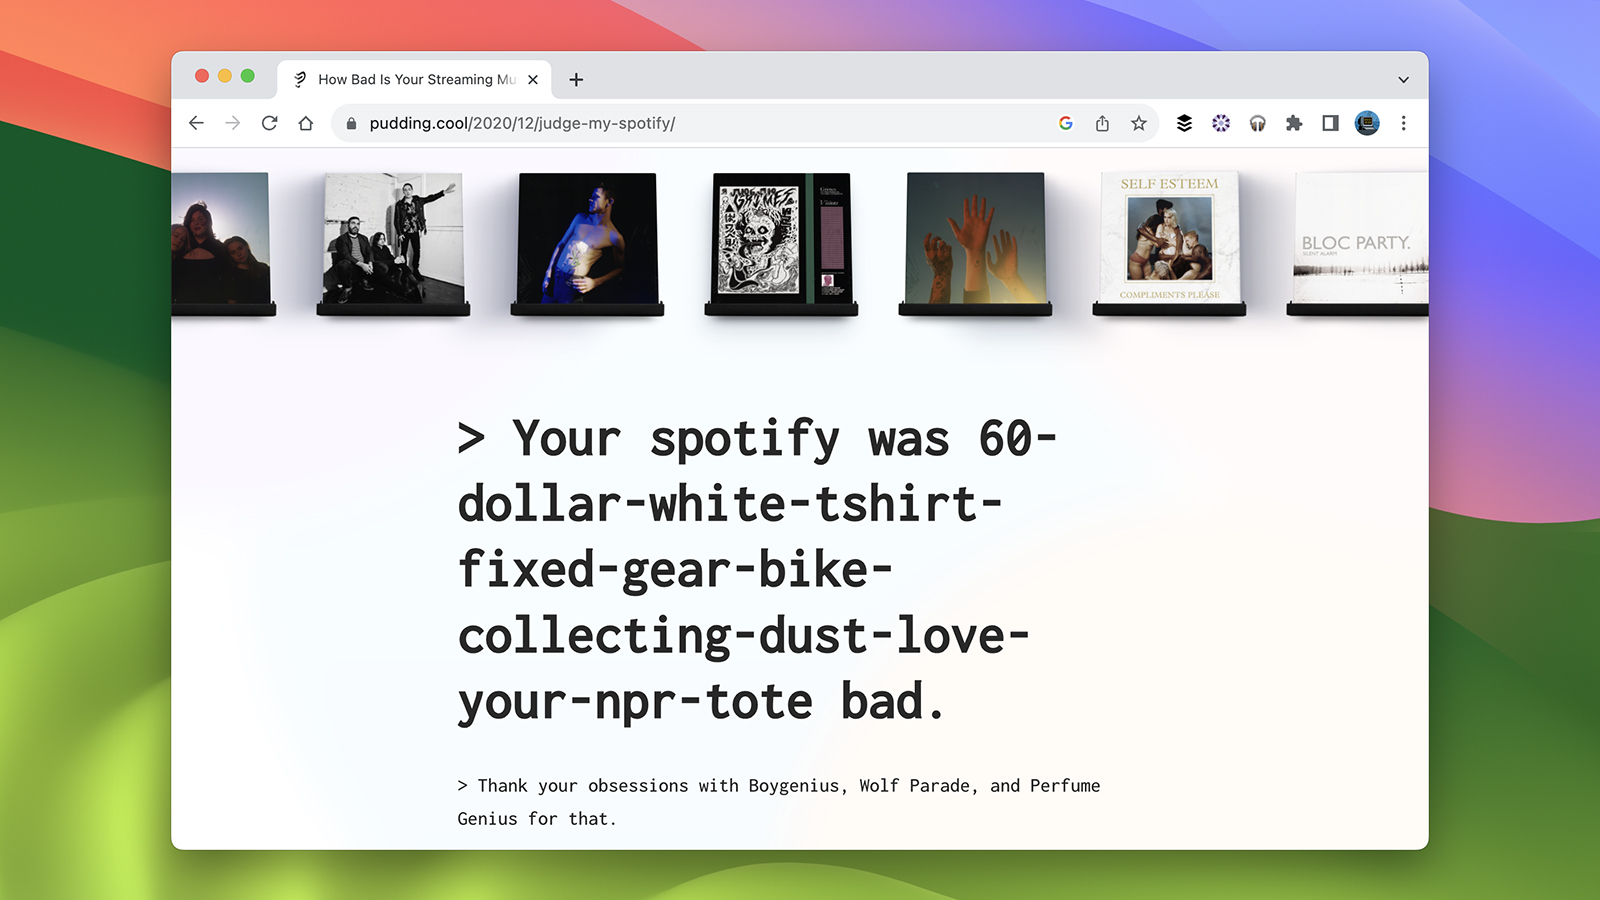 How Bad is Your Streaming Music? web app